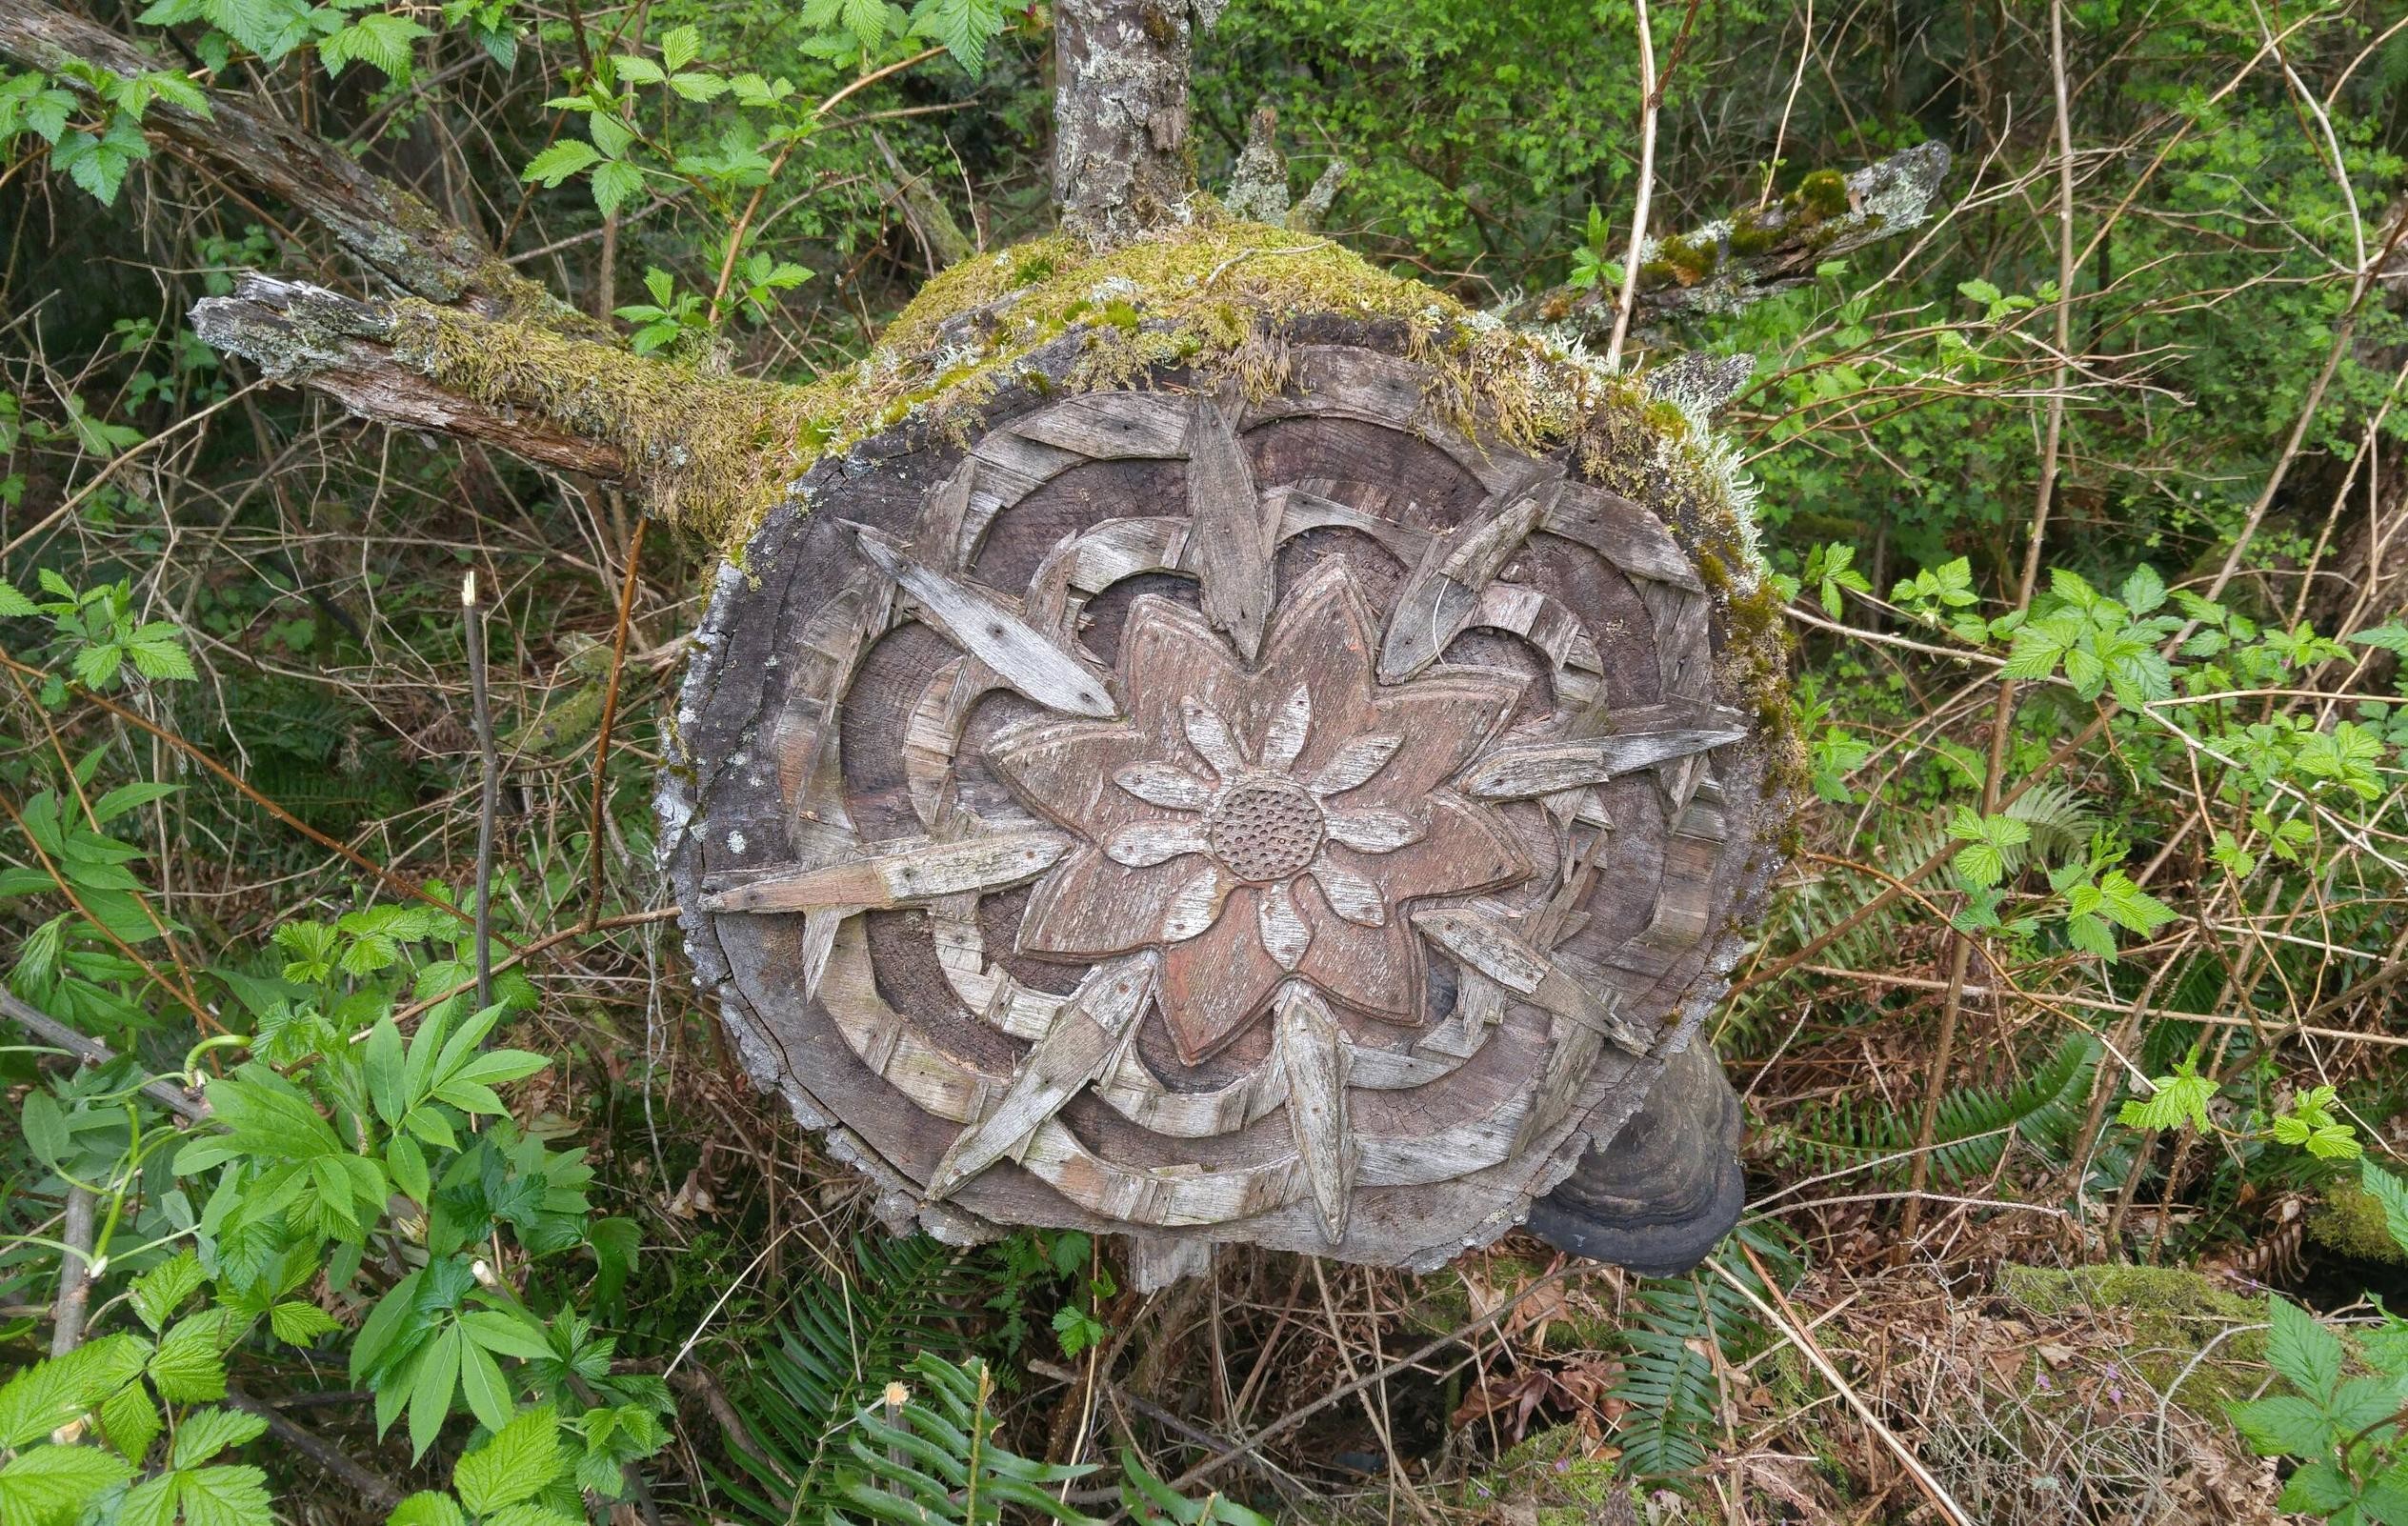 Interesting Finds In Forests (14 pics)